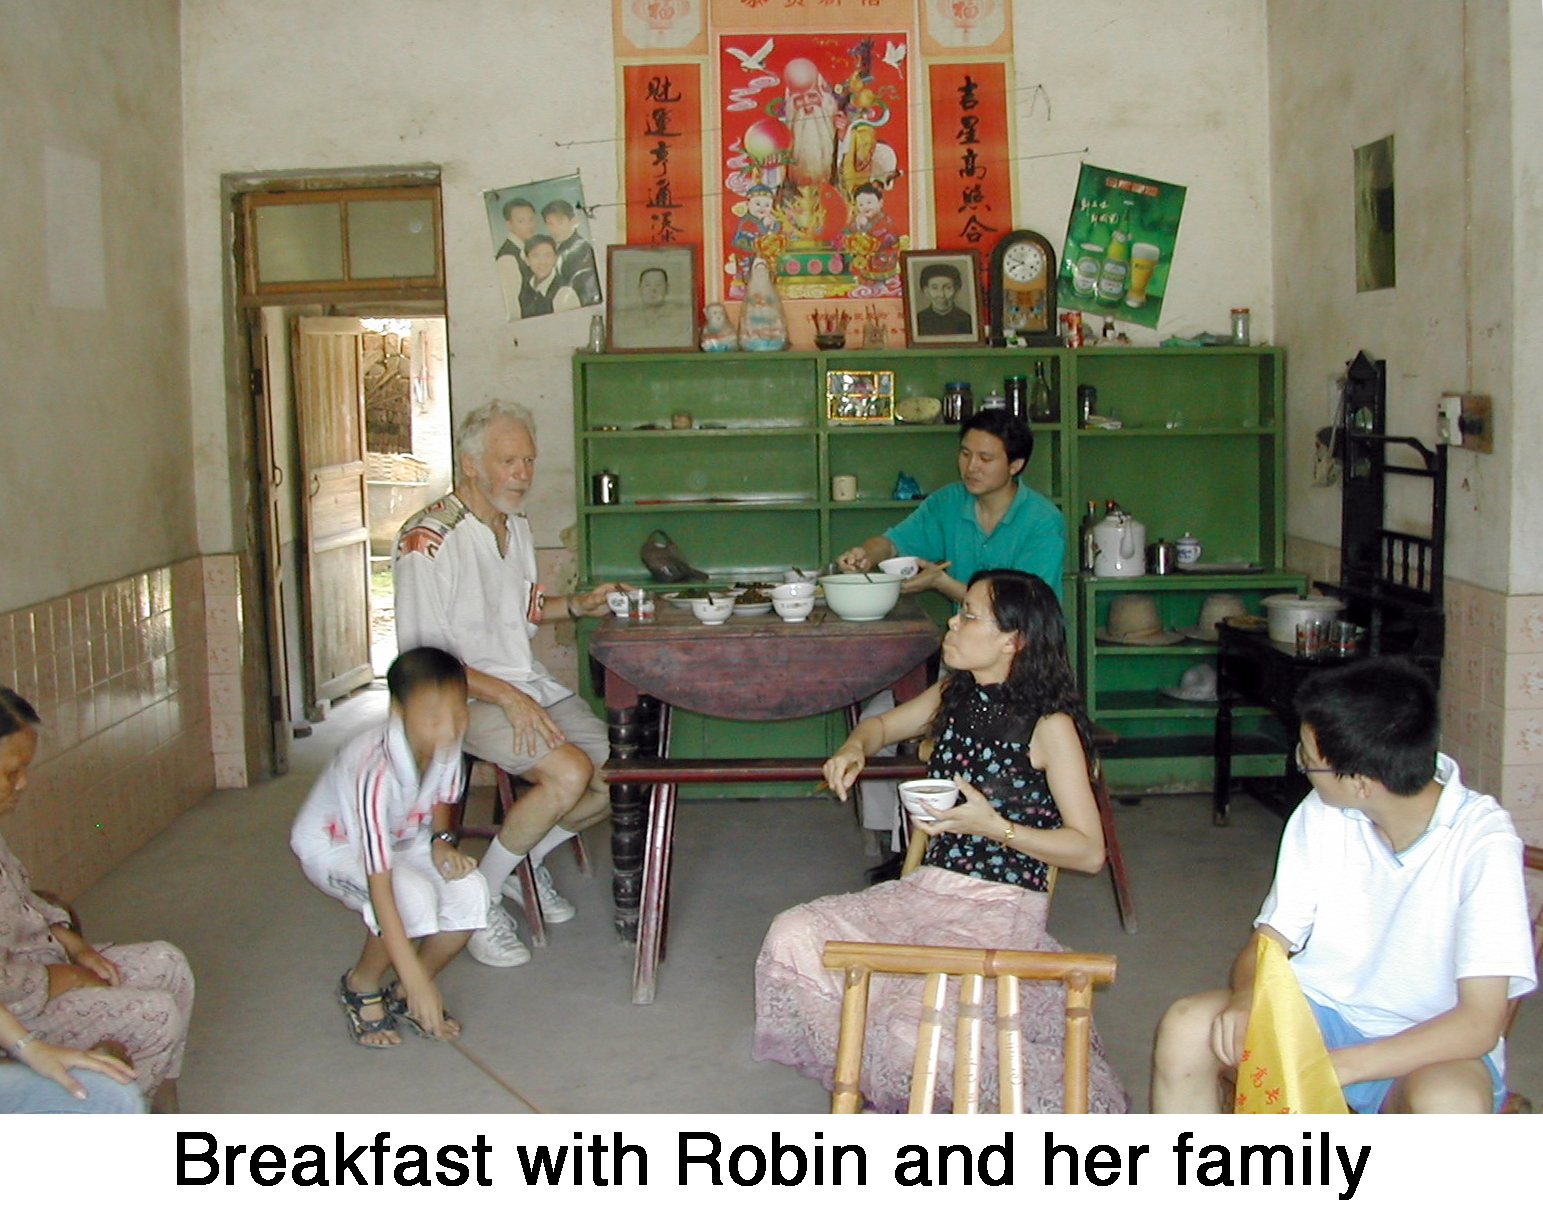 A room in Robin's family's house where Sandy and others are eating breakfast